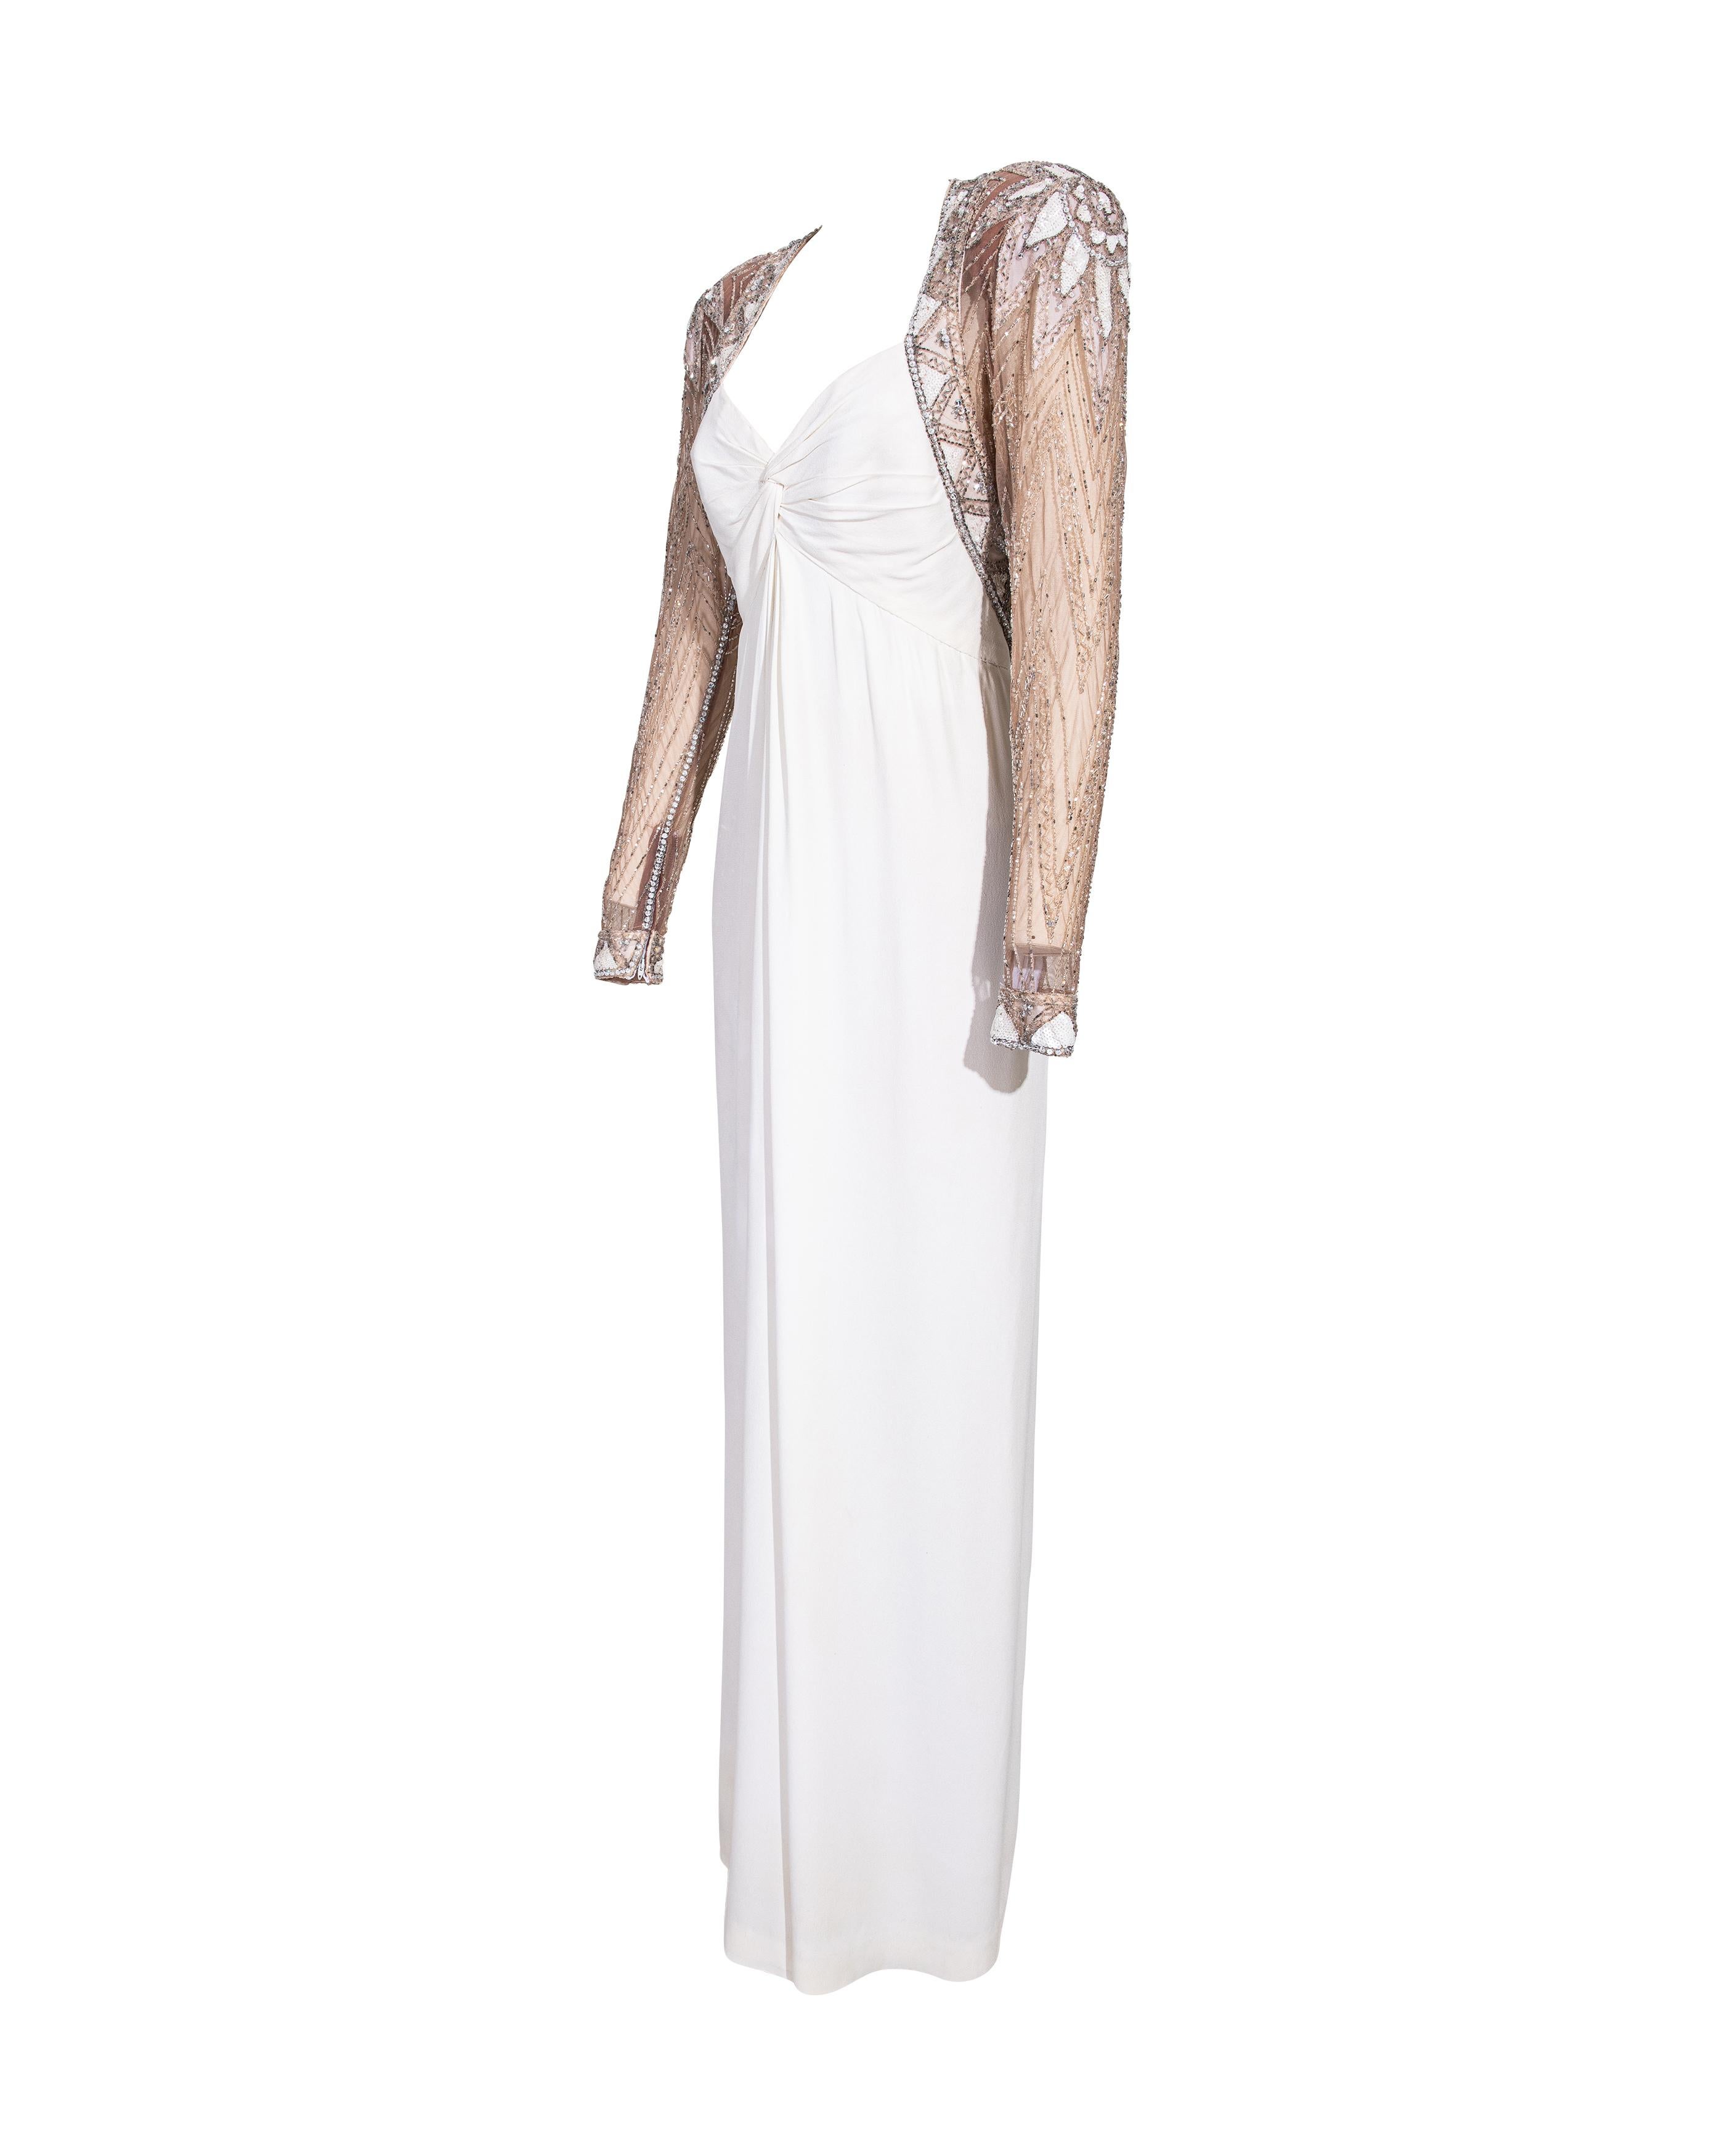 1980's Bob Mackie semi-sheer white embellished gown. Upper features heavily embellished tan mesh, while lower is white silk skirt with slight drape throughout. Semi-sheer mesh creates appearance of open back. Concealed center back zip closure with